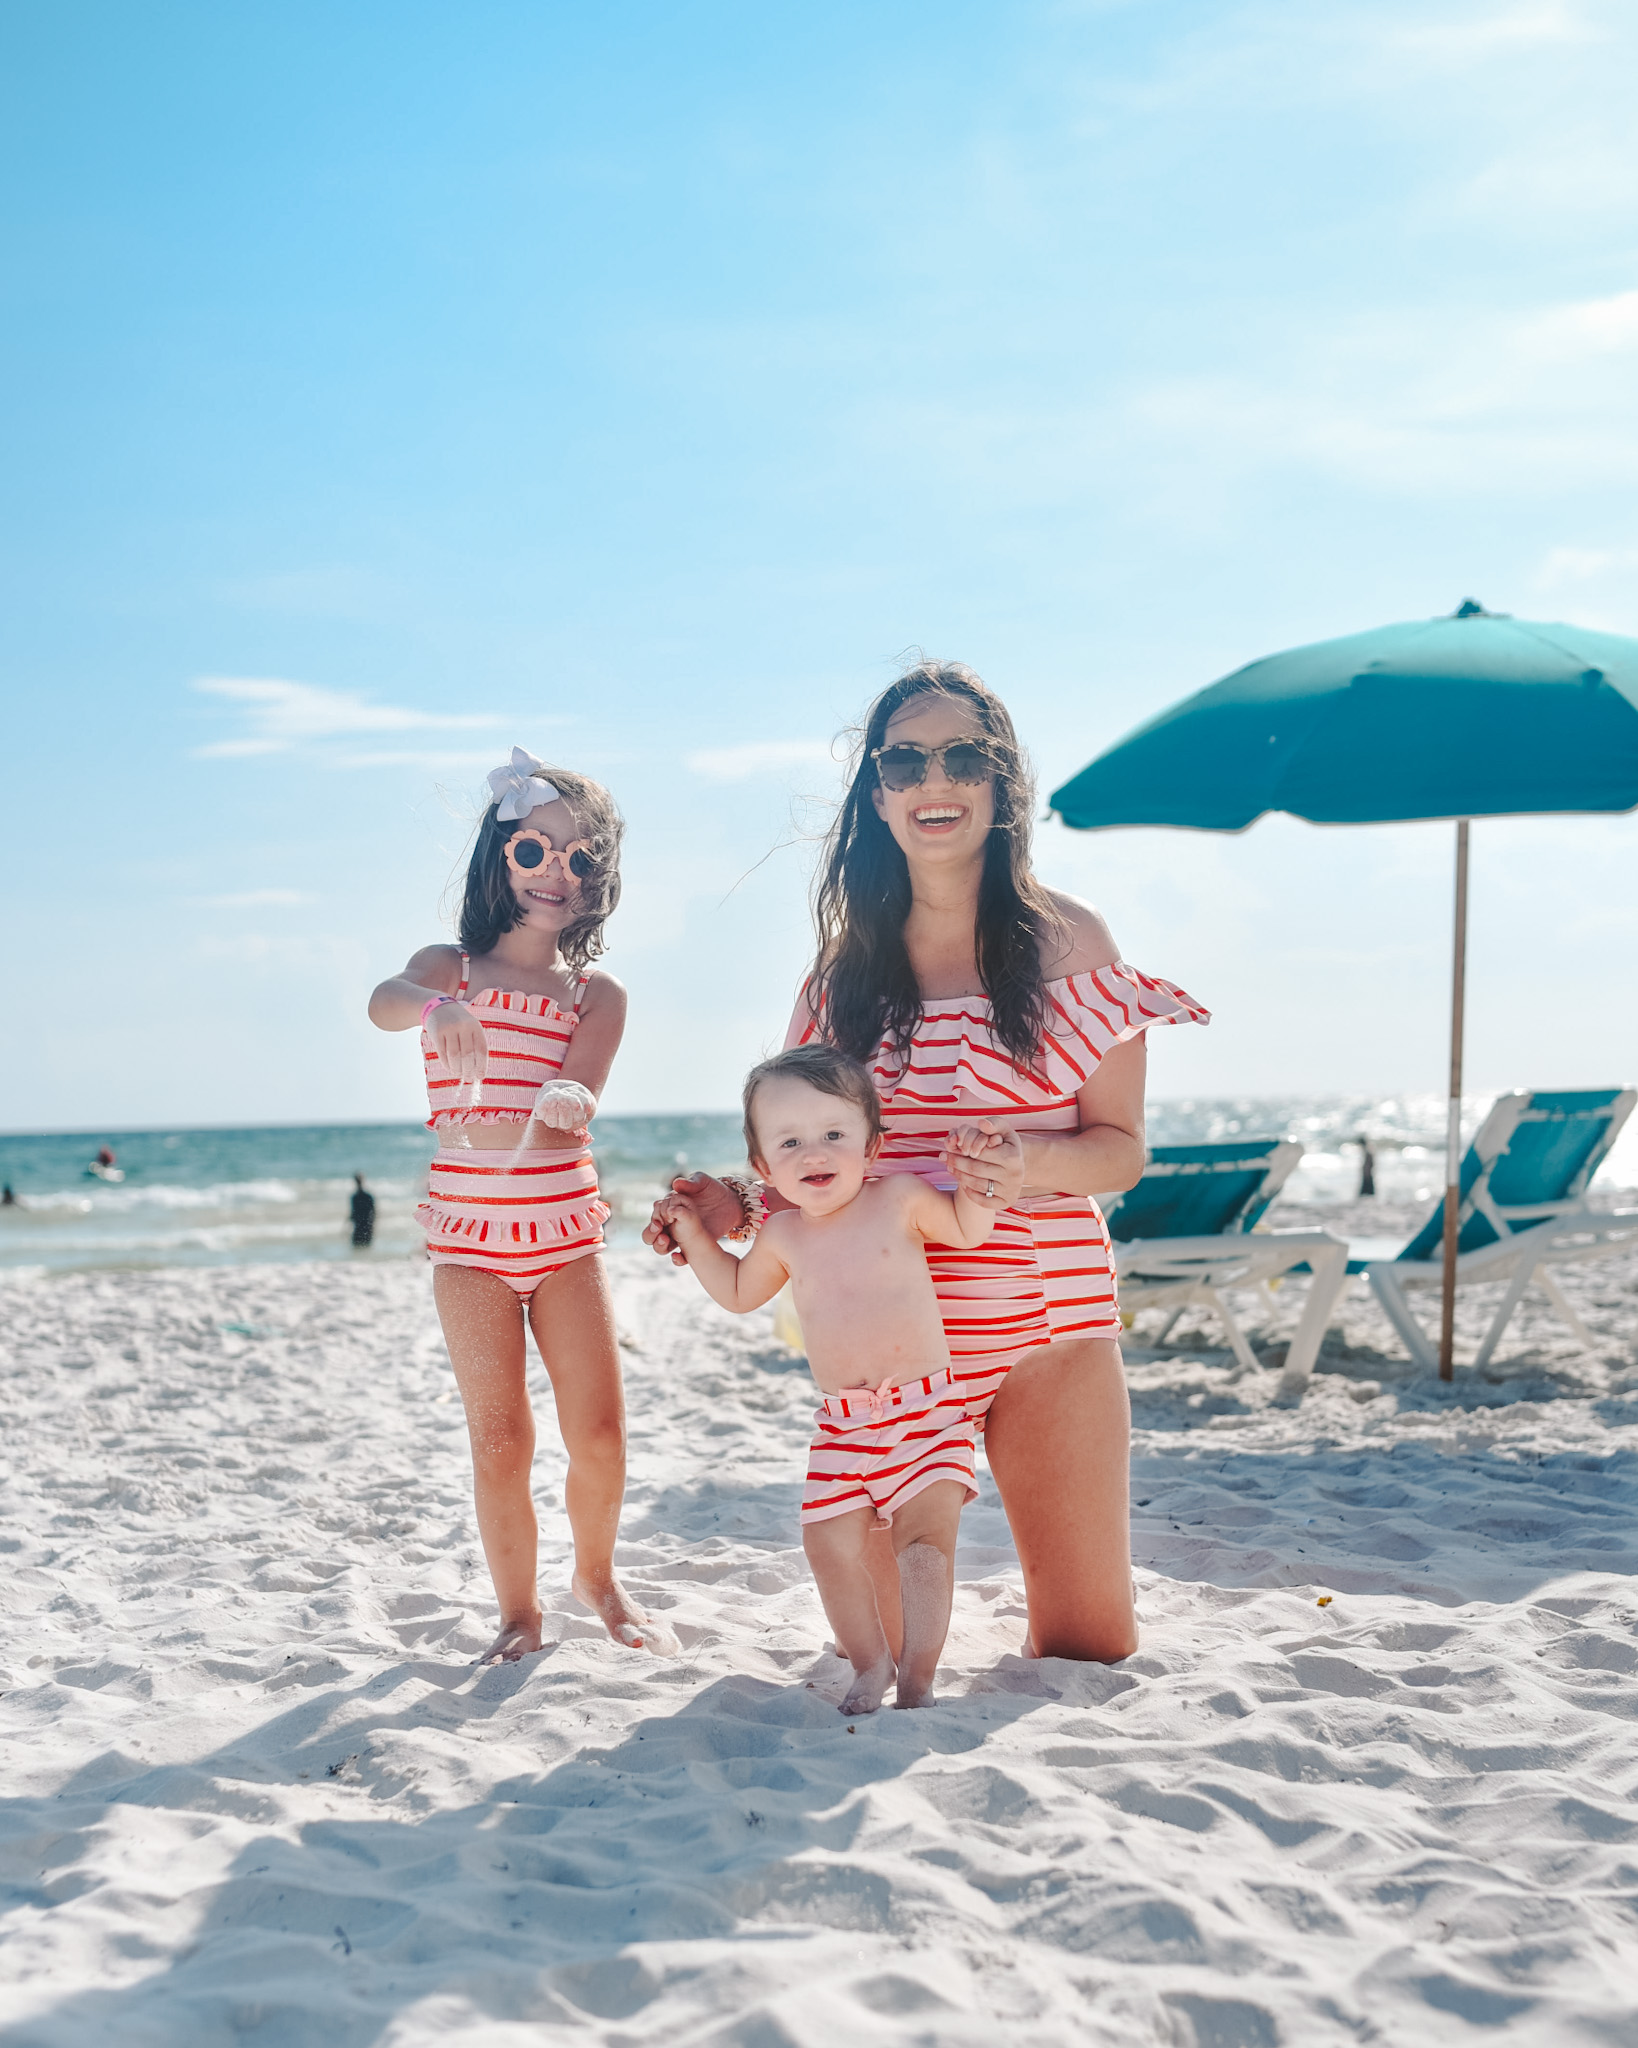 Panama City Beach Attractions by popular Memphis travel blog, Lone Star Looking Glass: image of a mom and her young son and daughter wearing matching orange and white stripe swimsuits on Panama City Beach. 